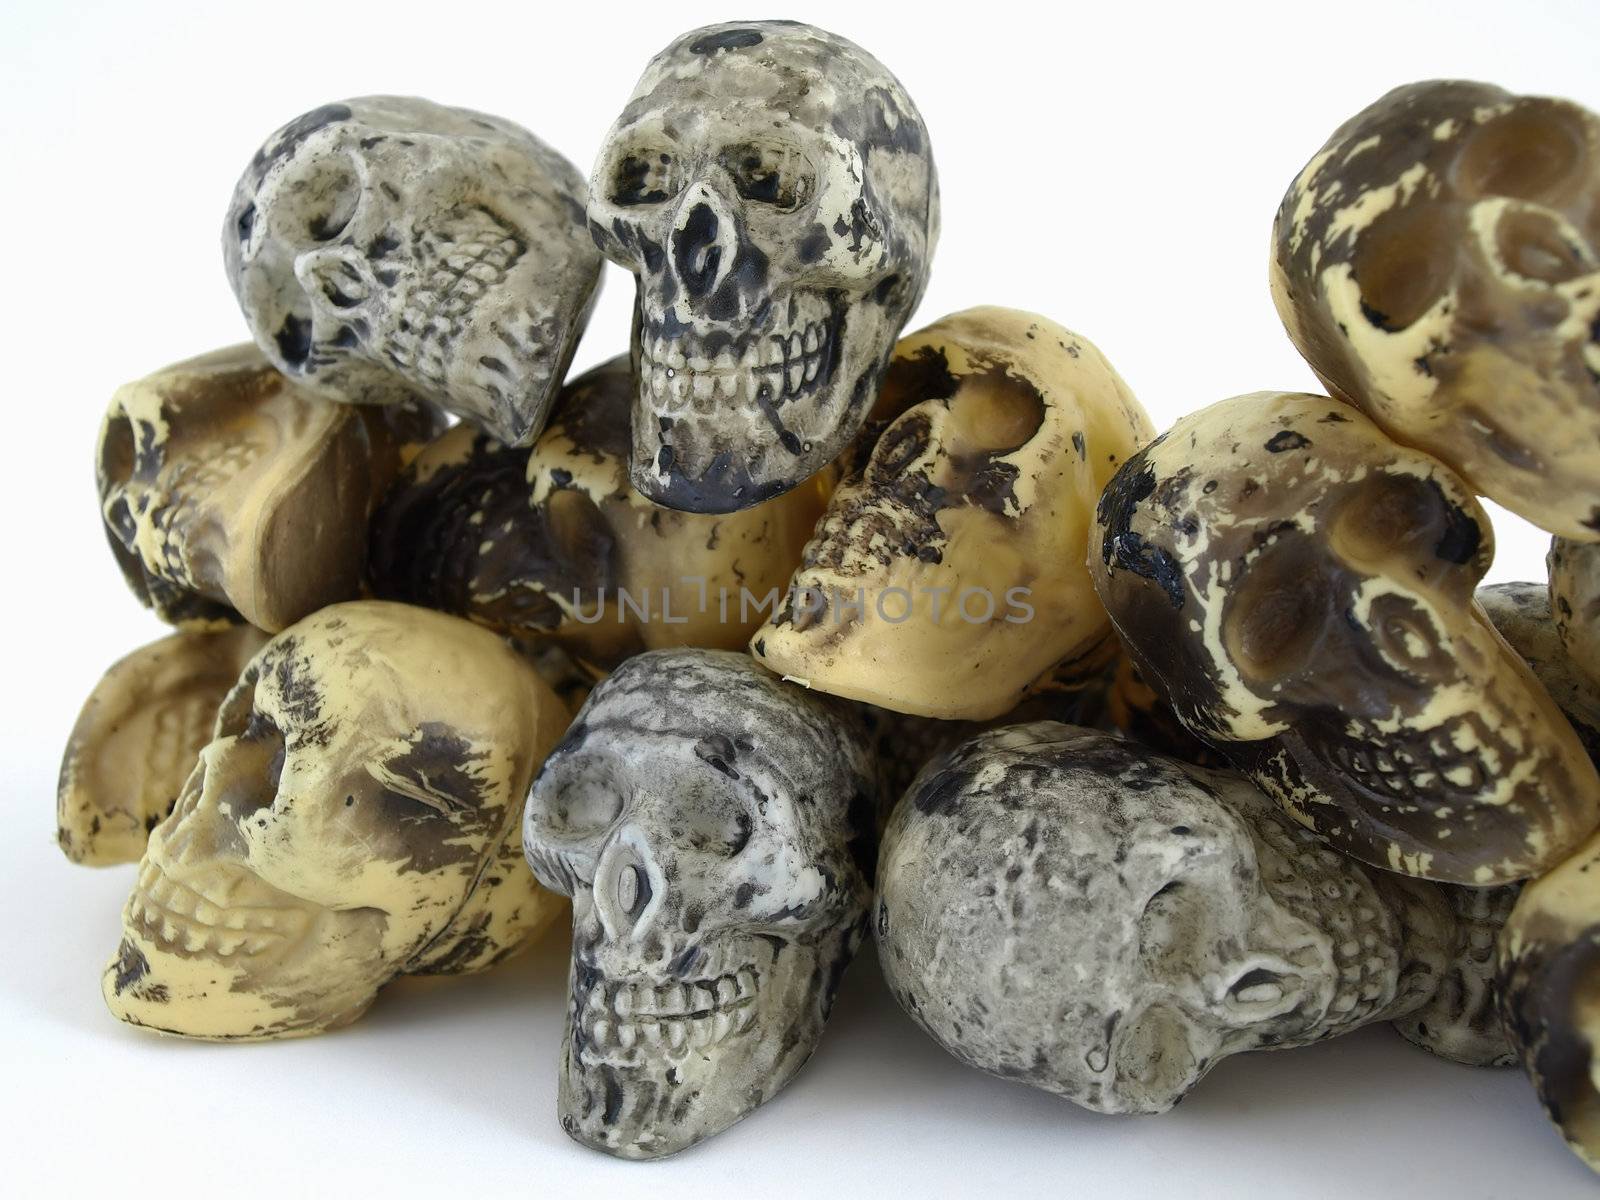 A pile of plastic toy skulls studio isolated over a white background.